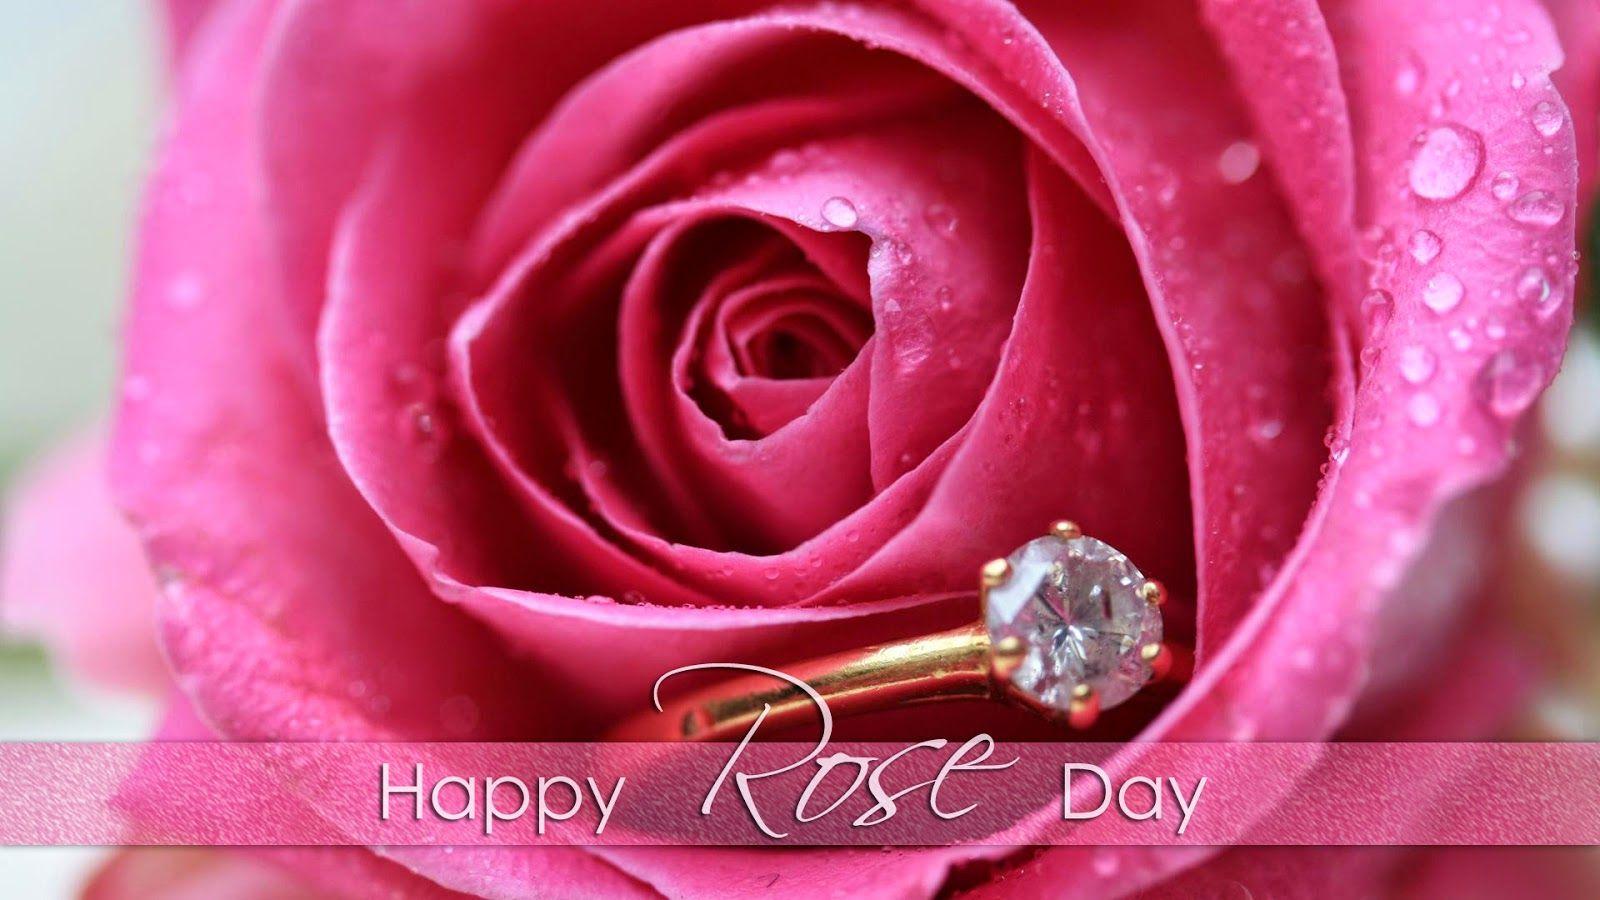 Latest} Happy Rose Day Beautiful HD Wallpapers 2018